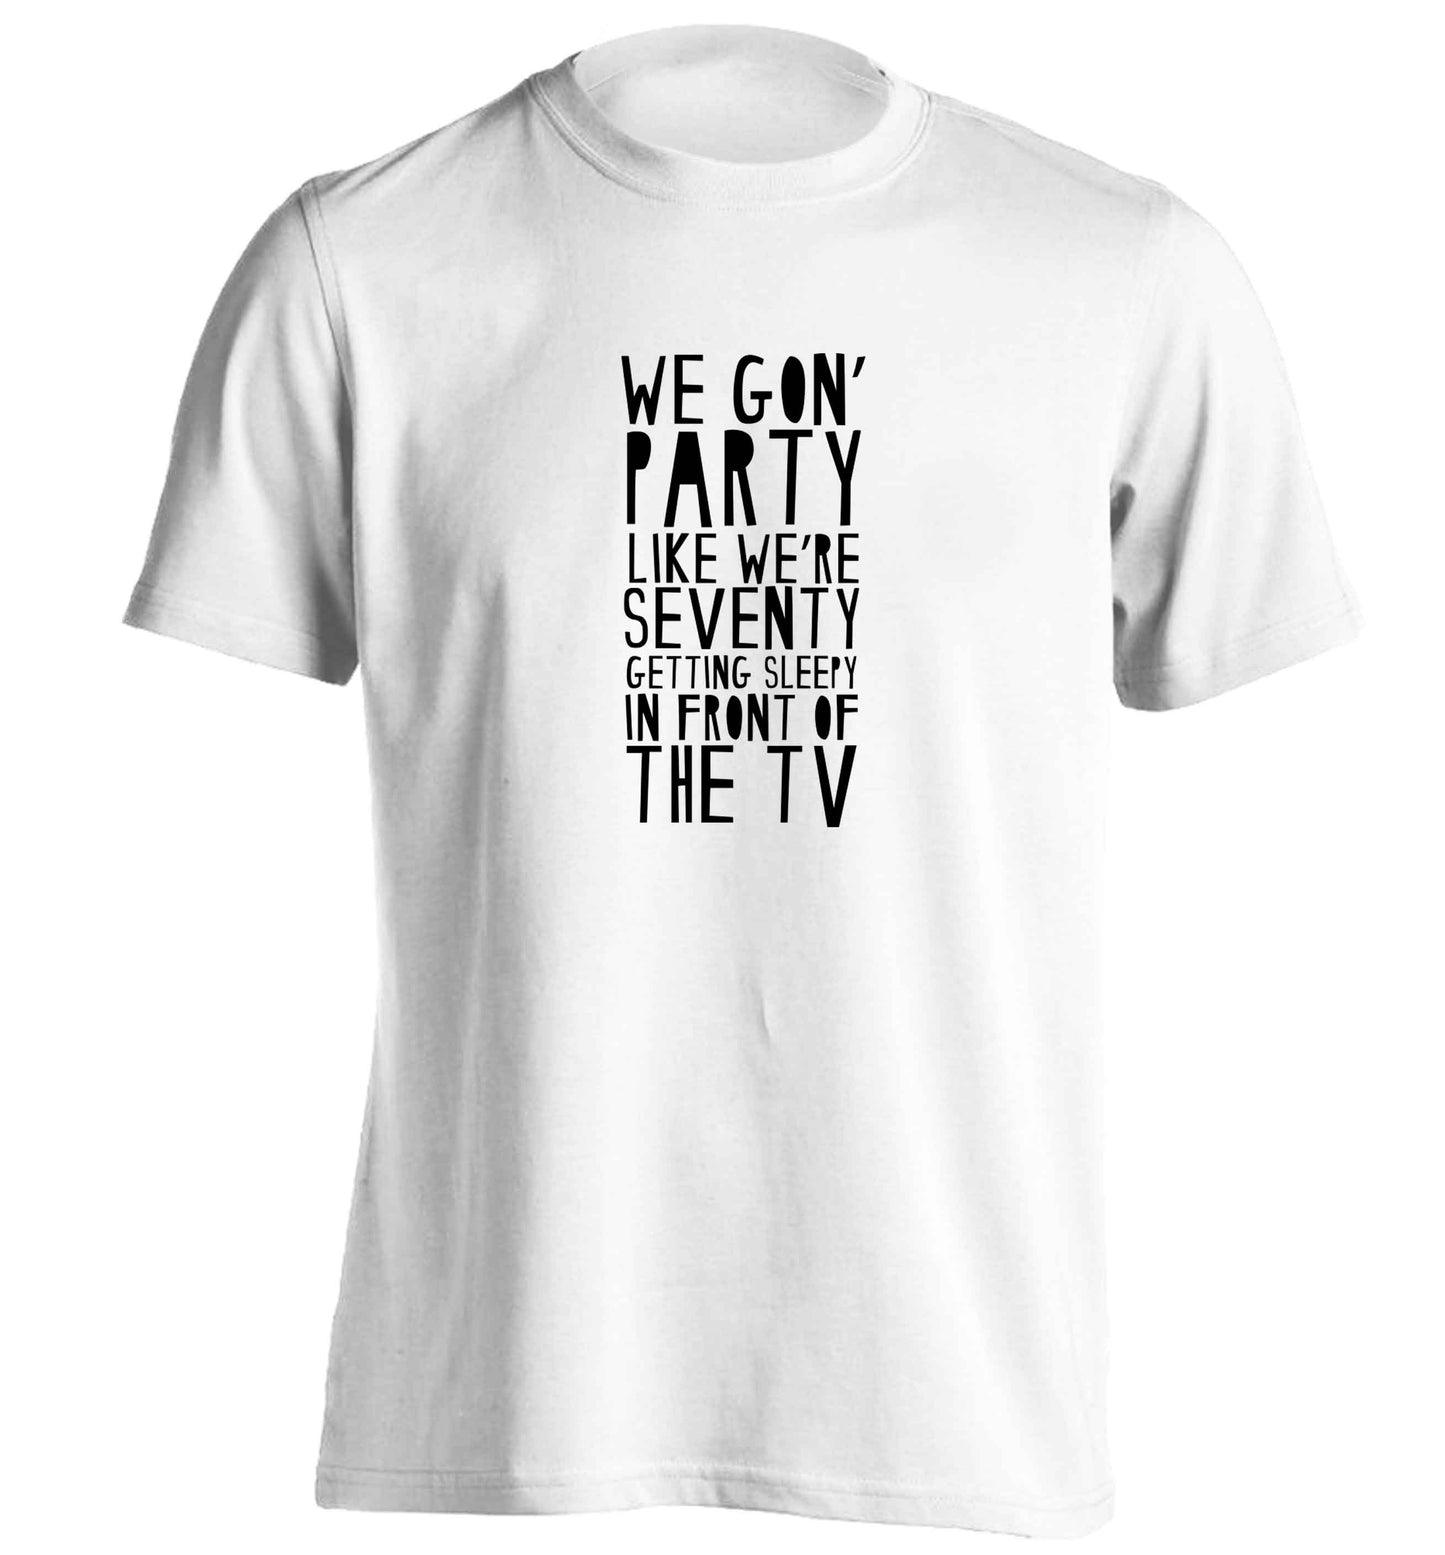 We gon' party like we're seventy getting sleepy in front of the TV adults unisex white Tshirt 2XL